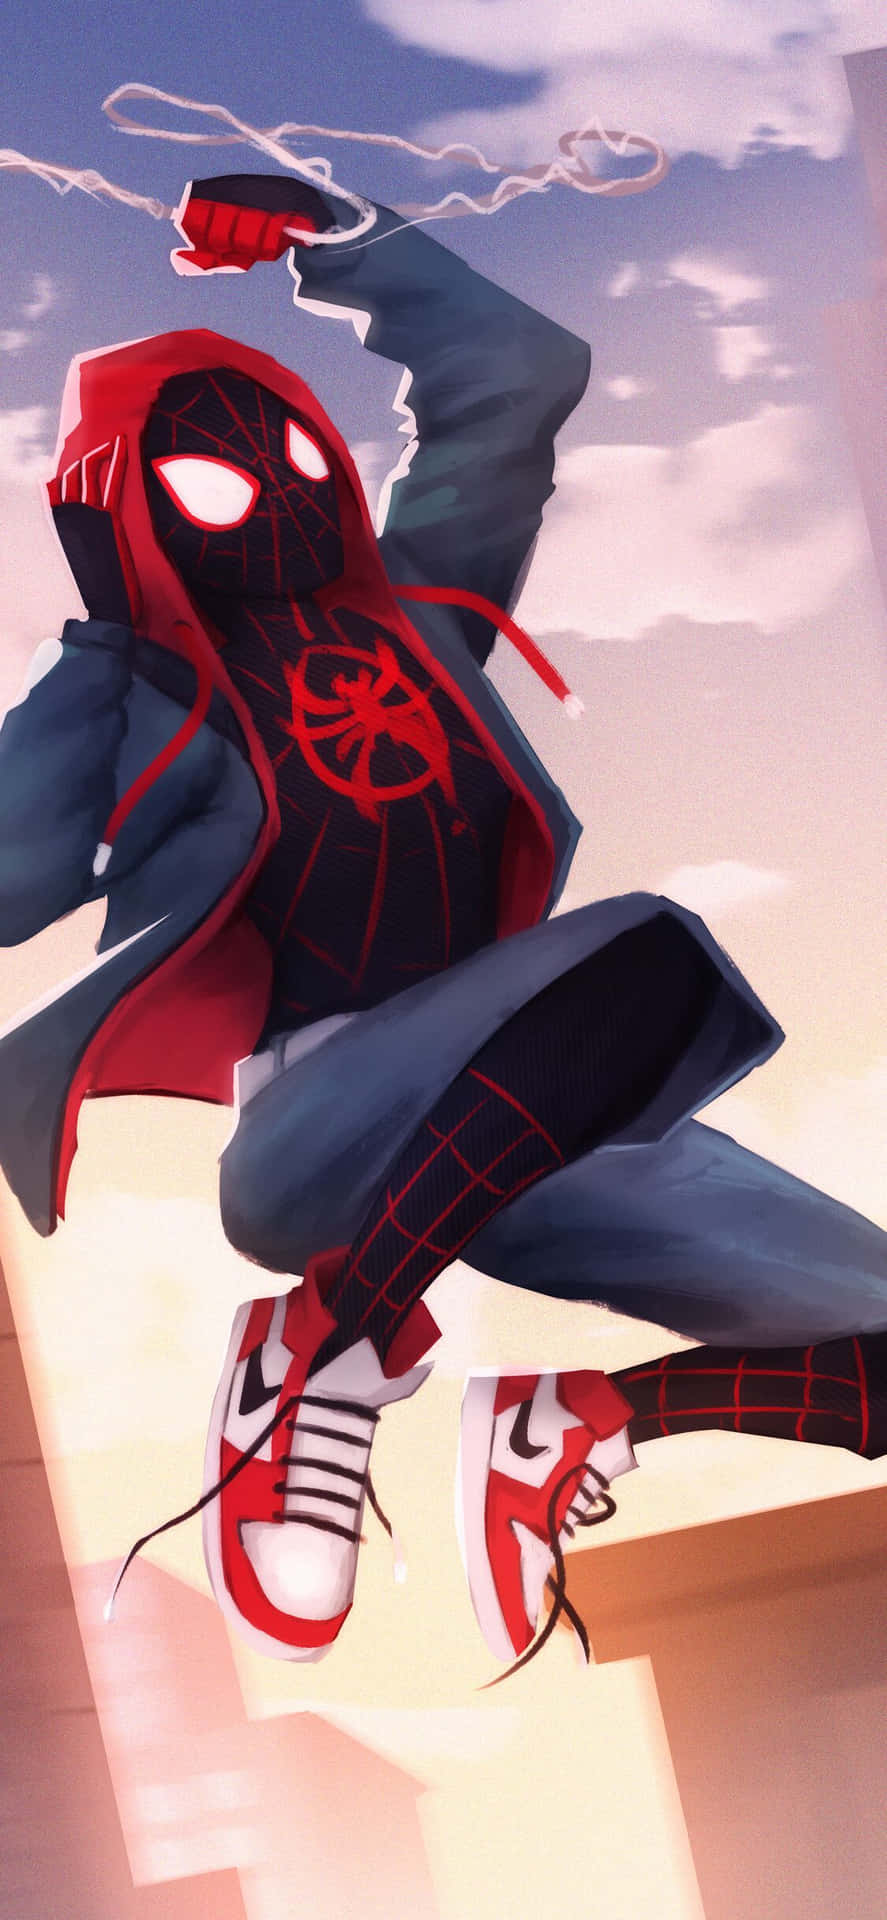 Sunset Sky With Marvel Fictional Character Miles Morales iPhone Wallpaper